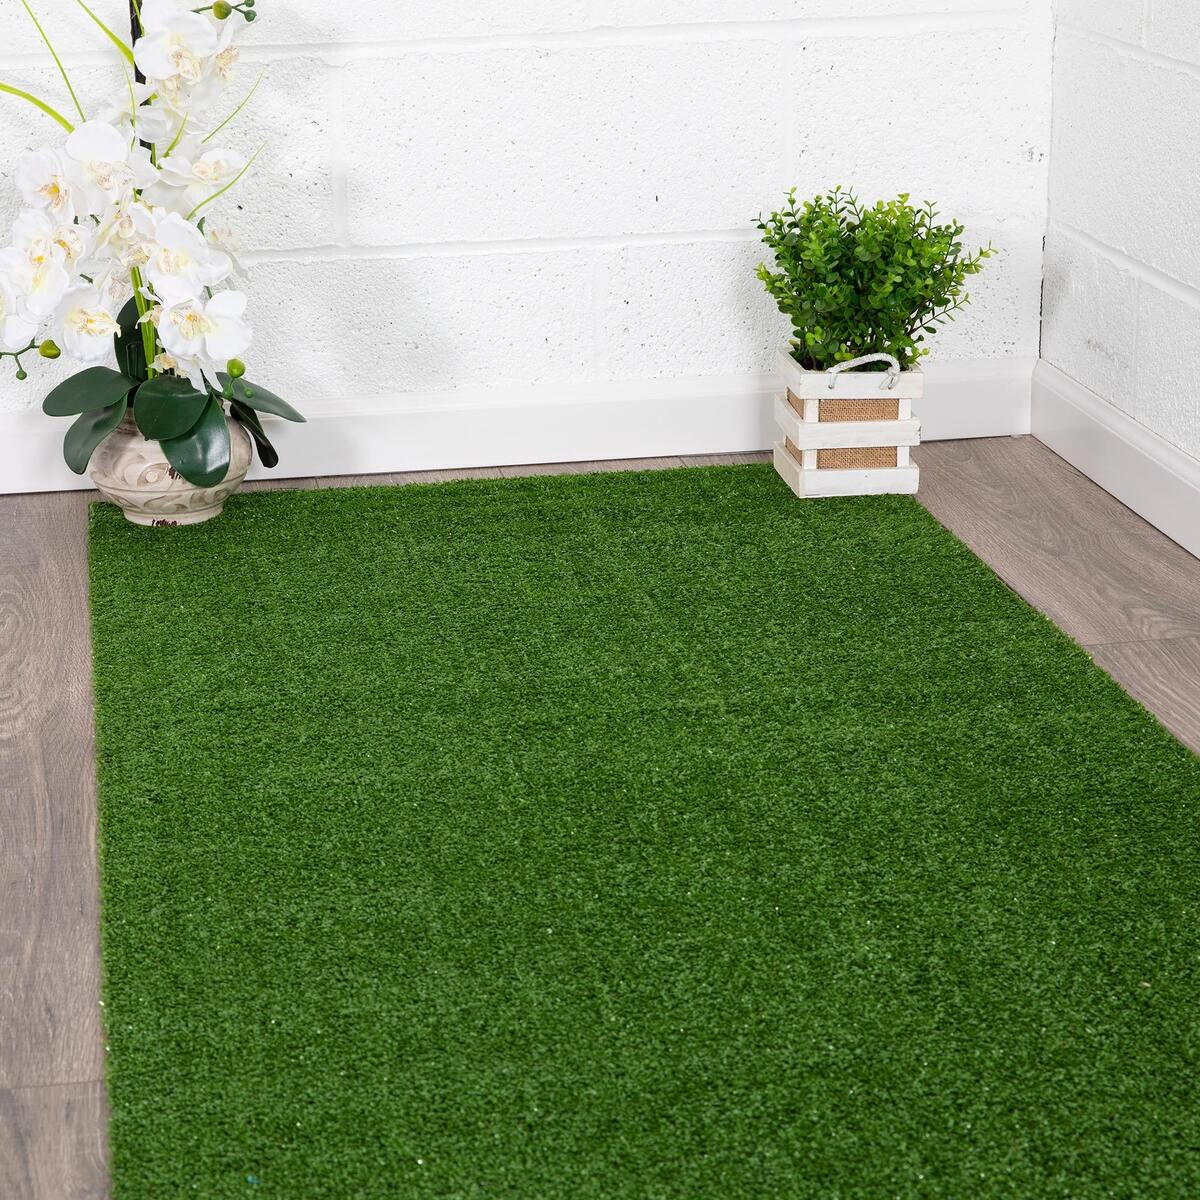 How To Clean Grass Carpet